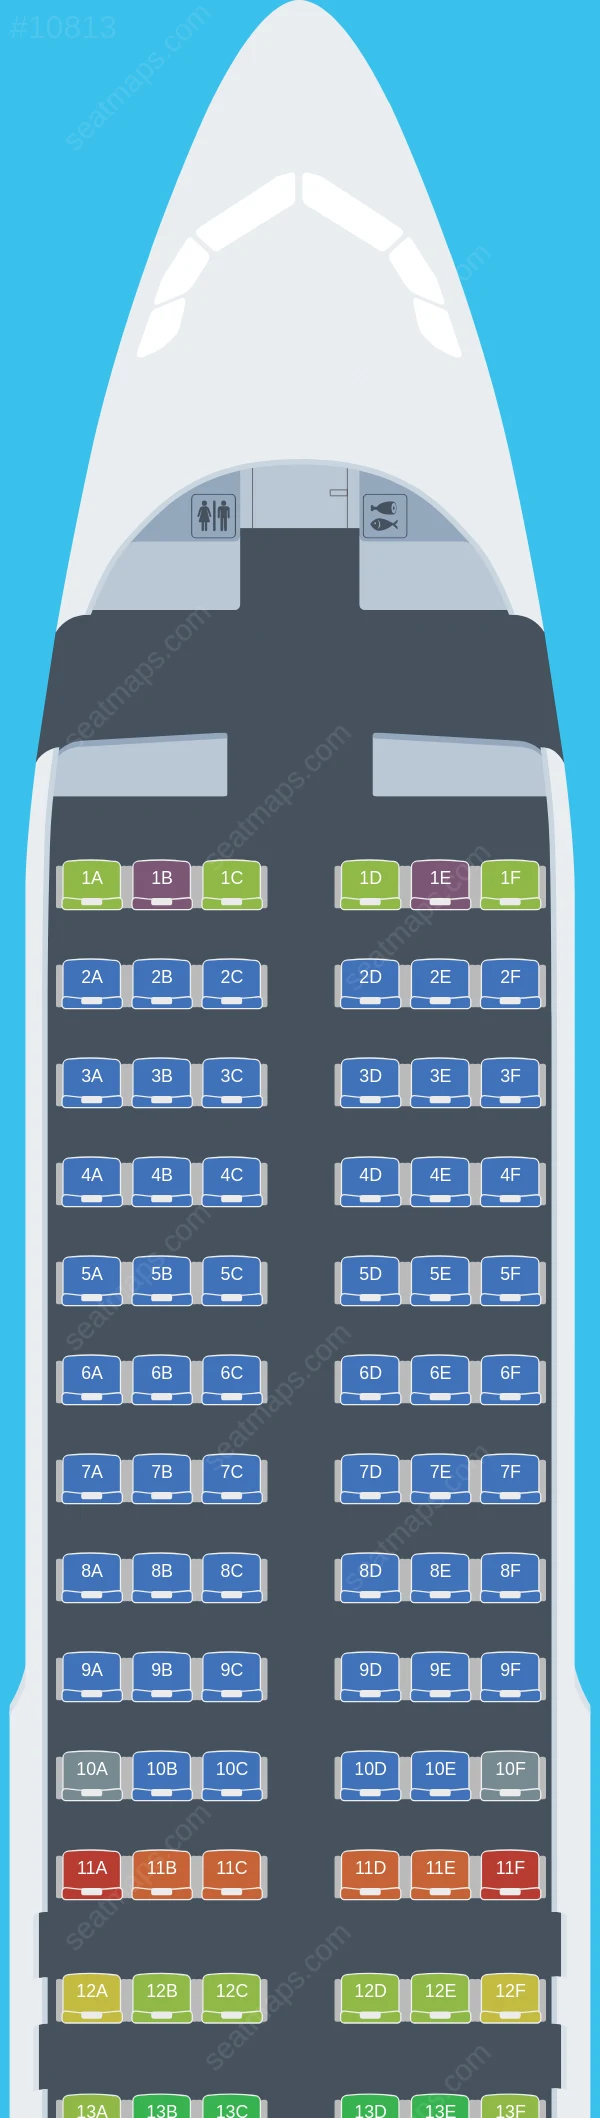 Aer Lingus Limited Airbus A320neo seatmap preview